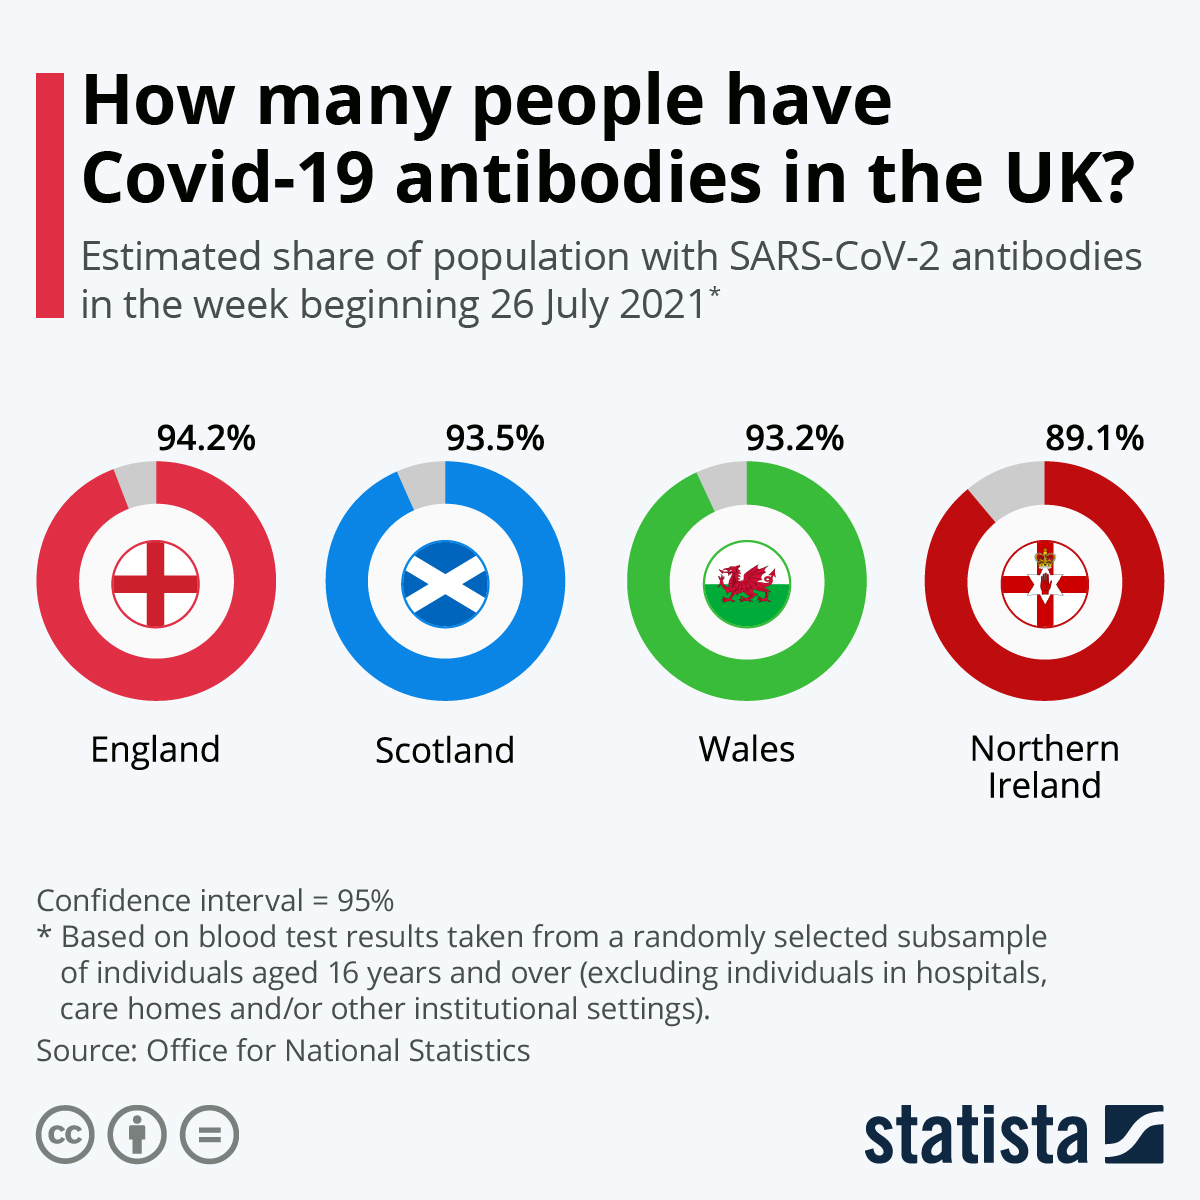 How many people have Covid-19 antibodies in the UK?